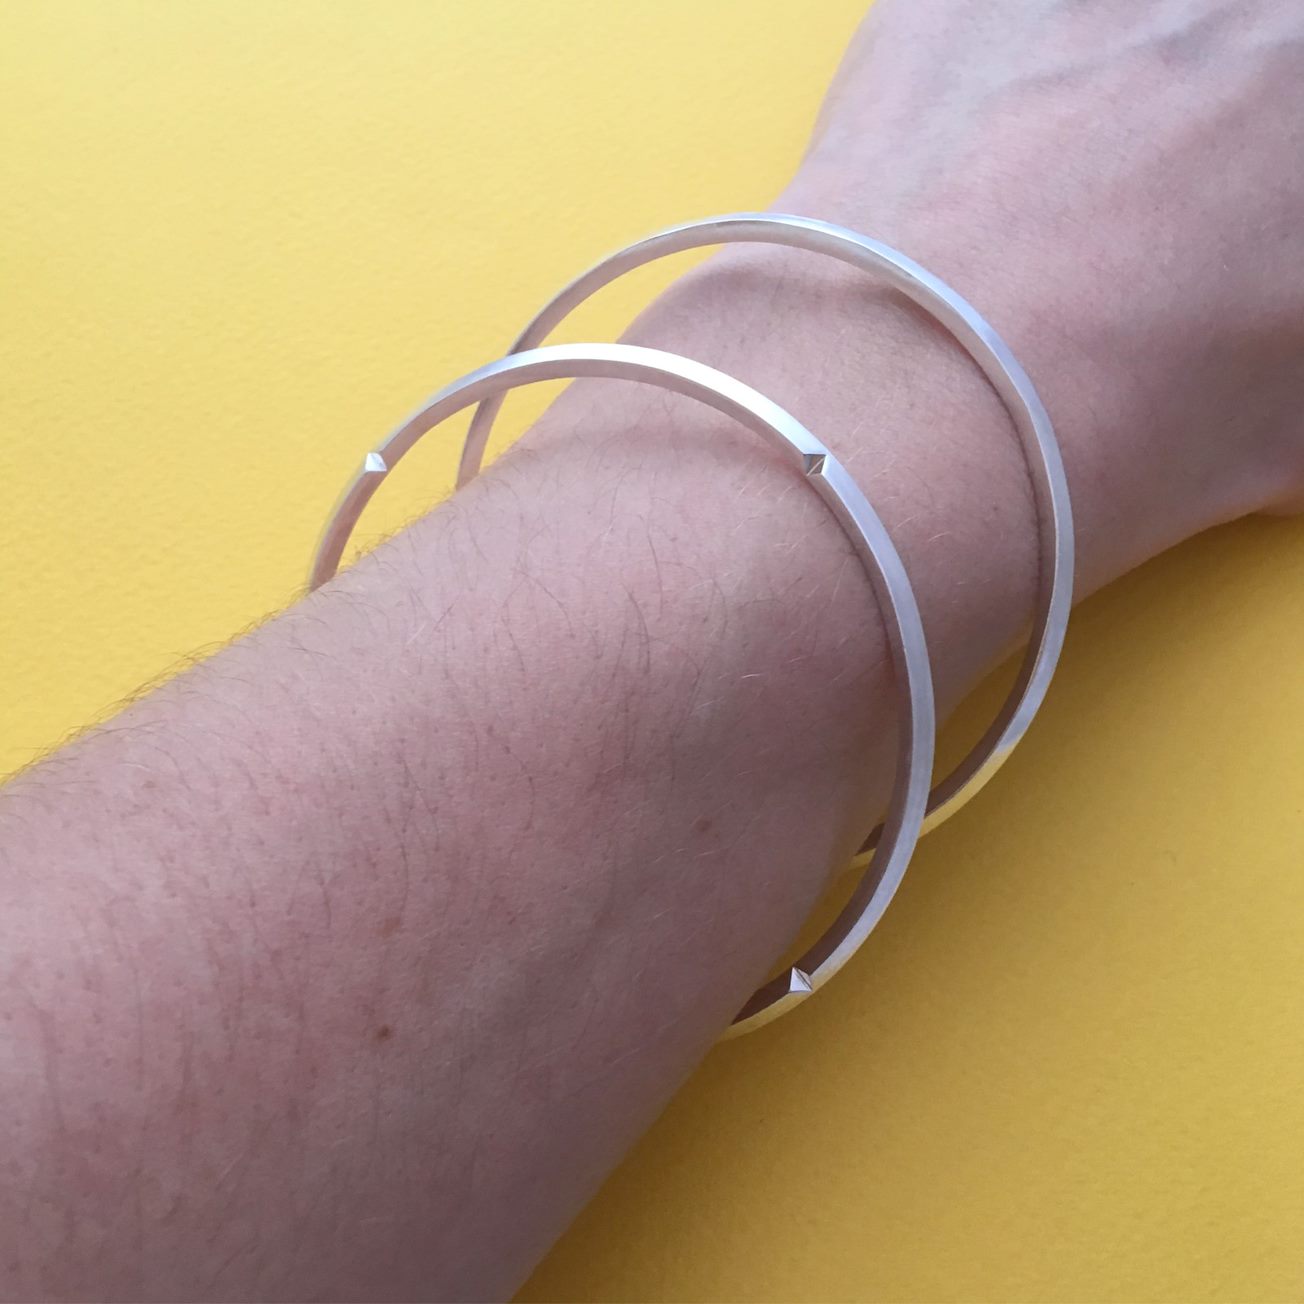 Detail of a wrist with two silver bangles, against a yellow background.